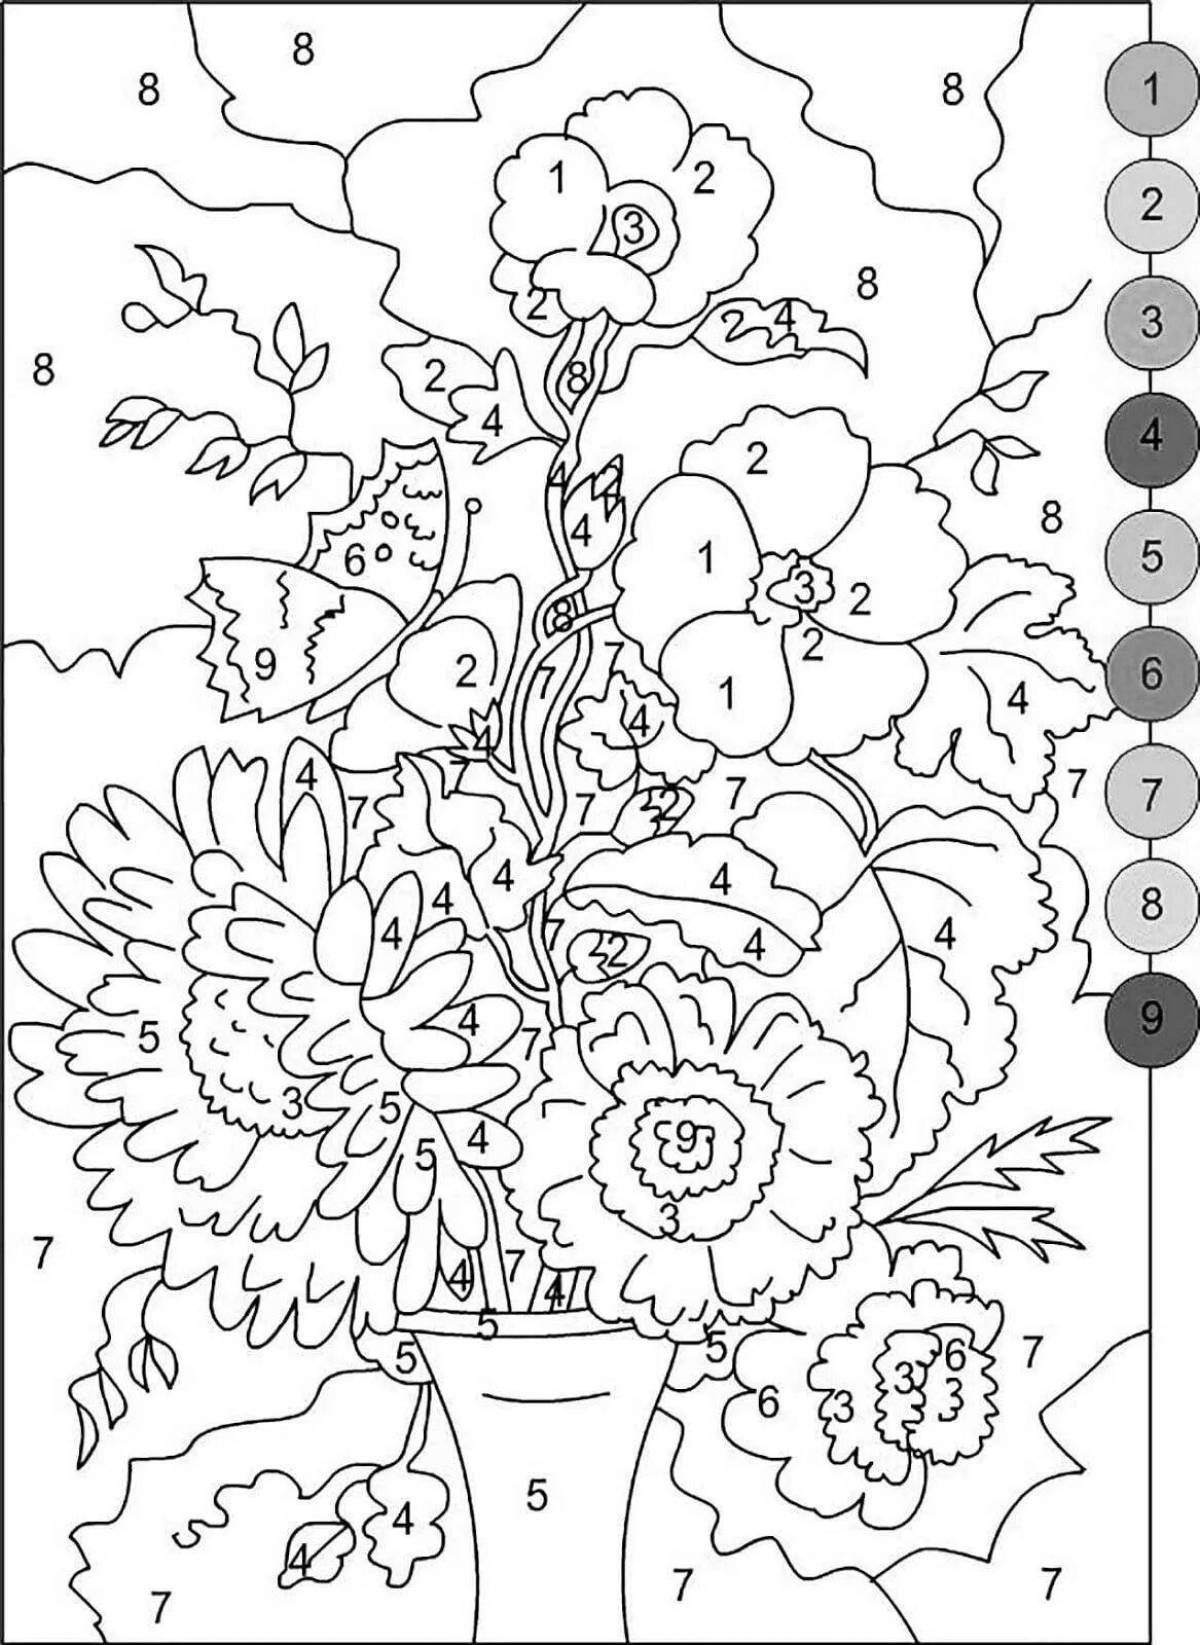 Joyful coloring by numbers for all adults